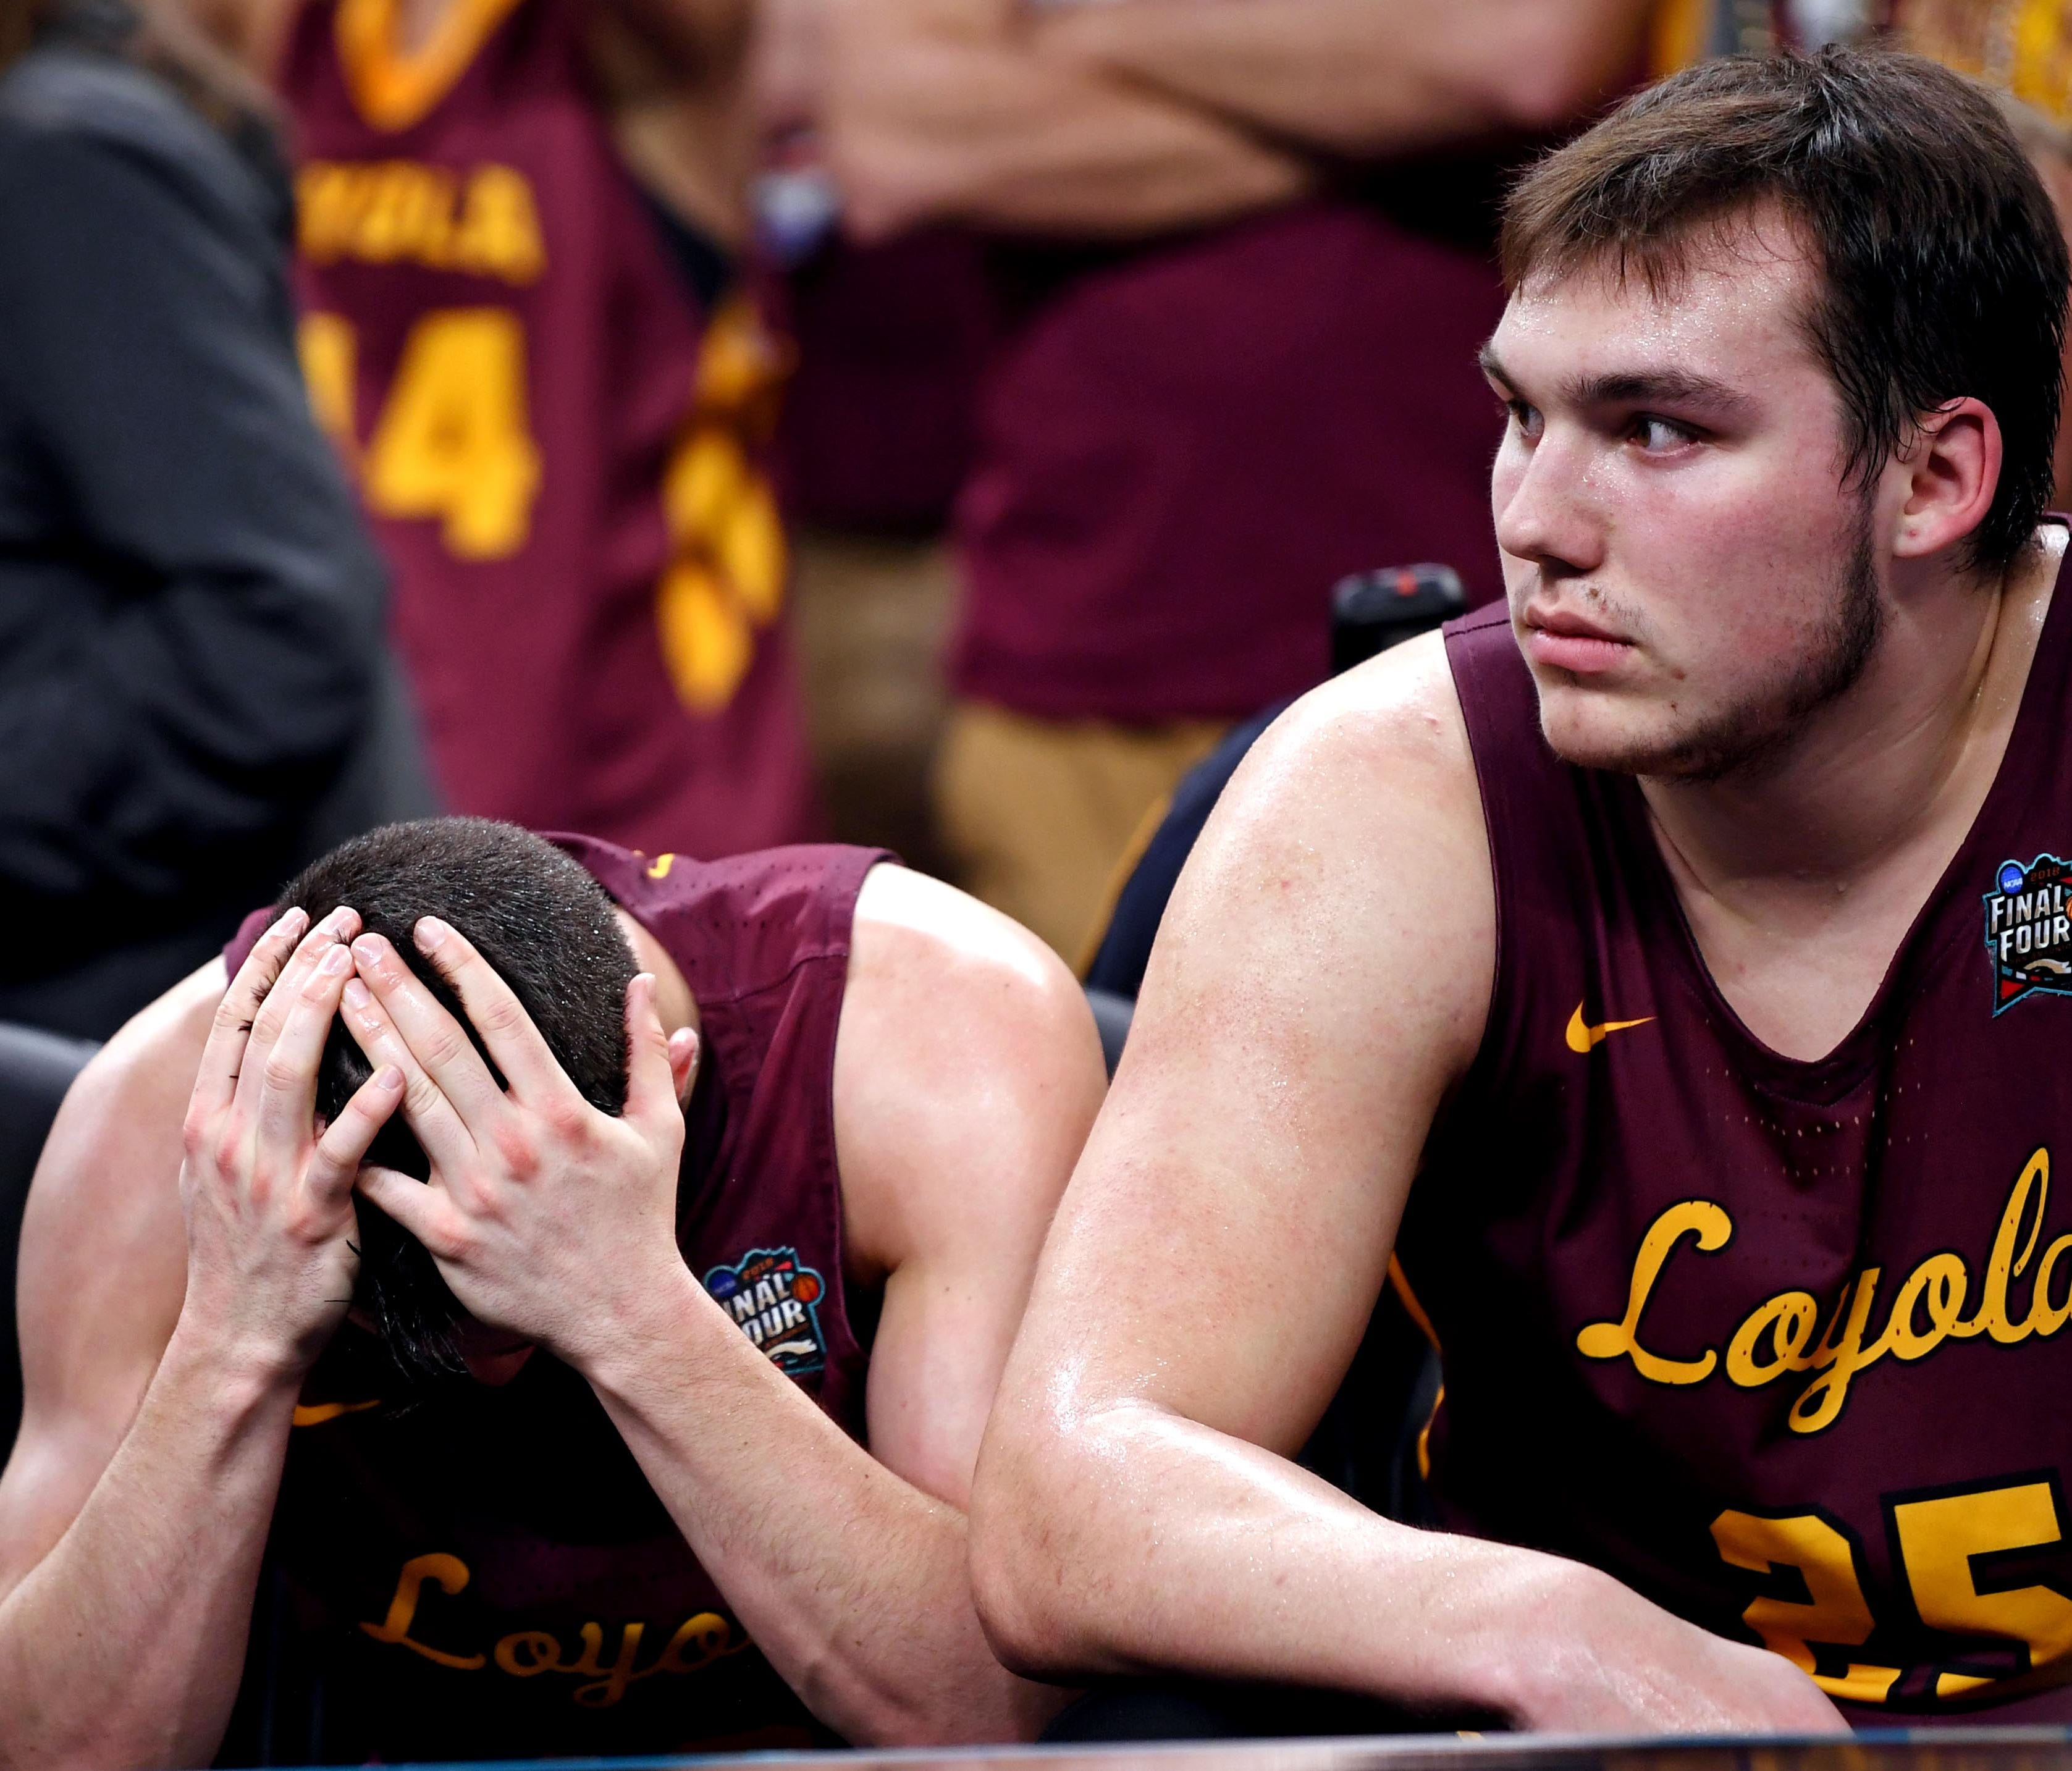 Loyola Ramblers guard Clayton Custer (13) and center Cameron Krutwig (25) react on the bench during the second half against the Michigan Wolverines in the semifinals of the 2018 men's Final Four at Alamodome.